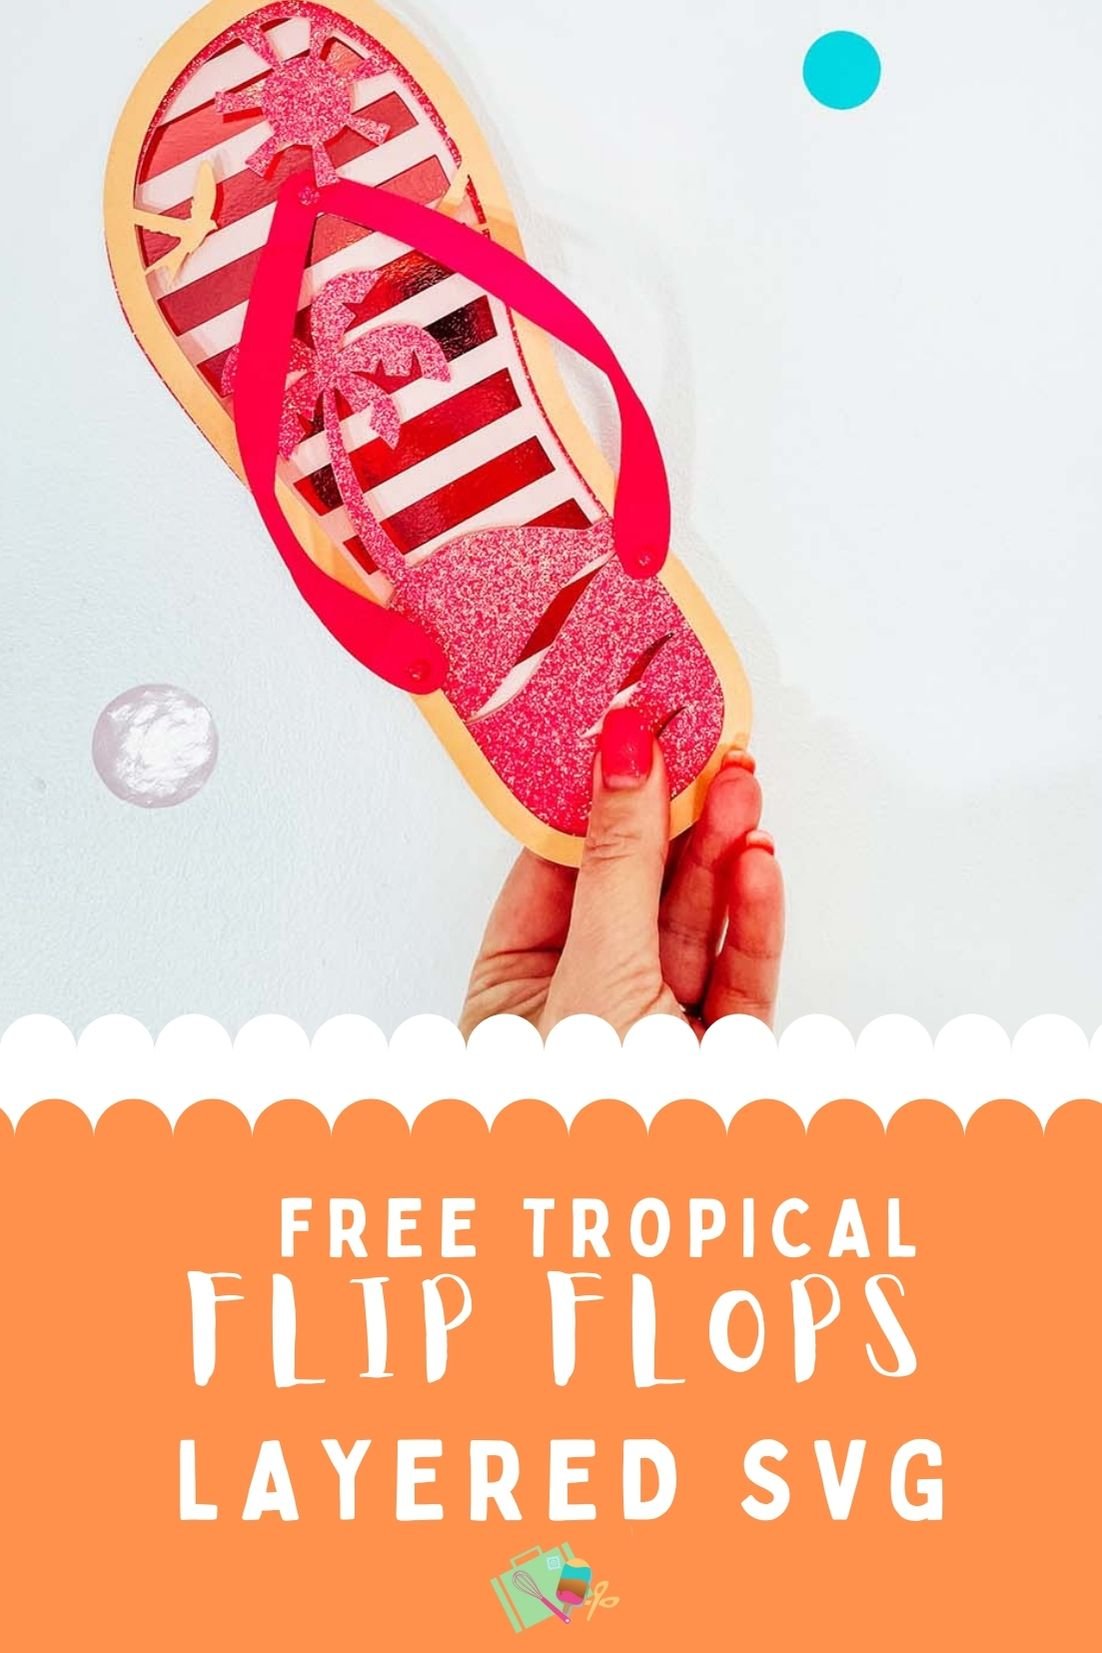 Free Flip Flops tropical summer layered SVG files for card making and scrapbooking